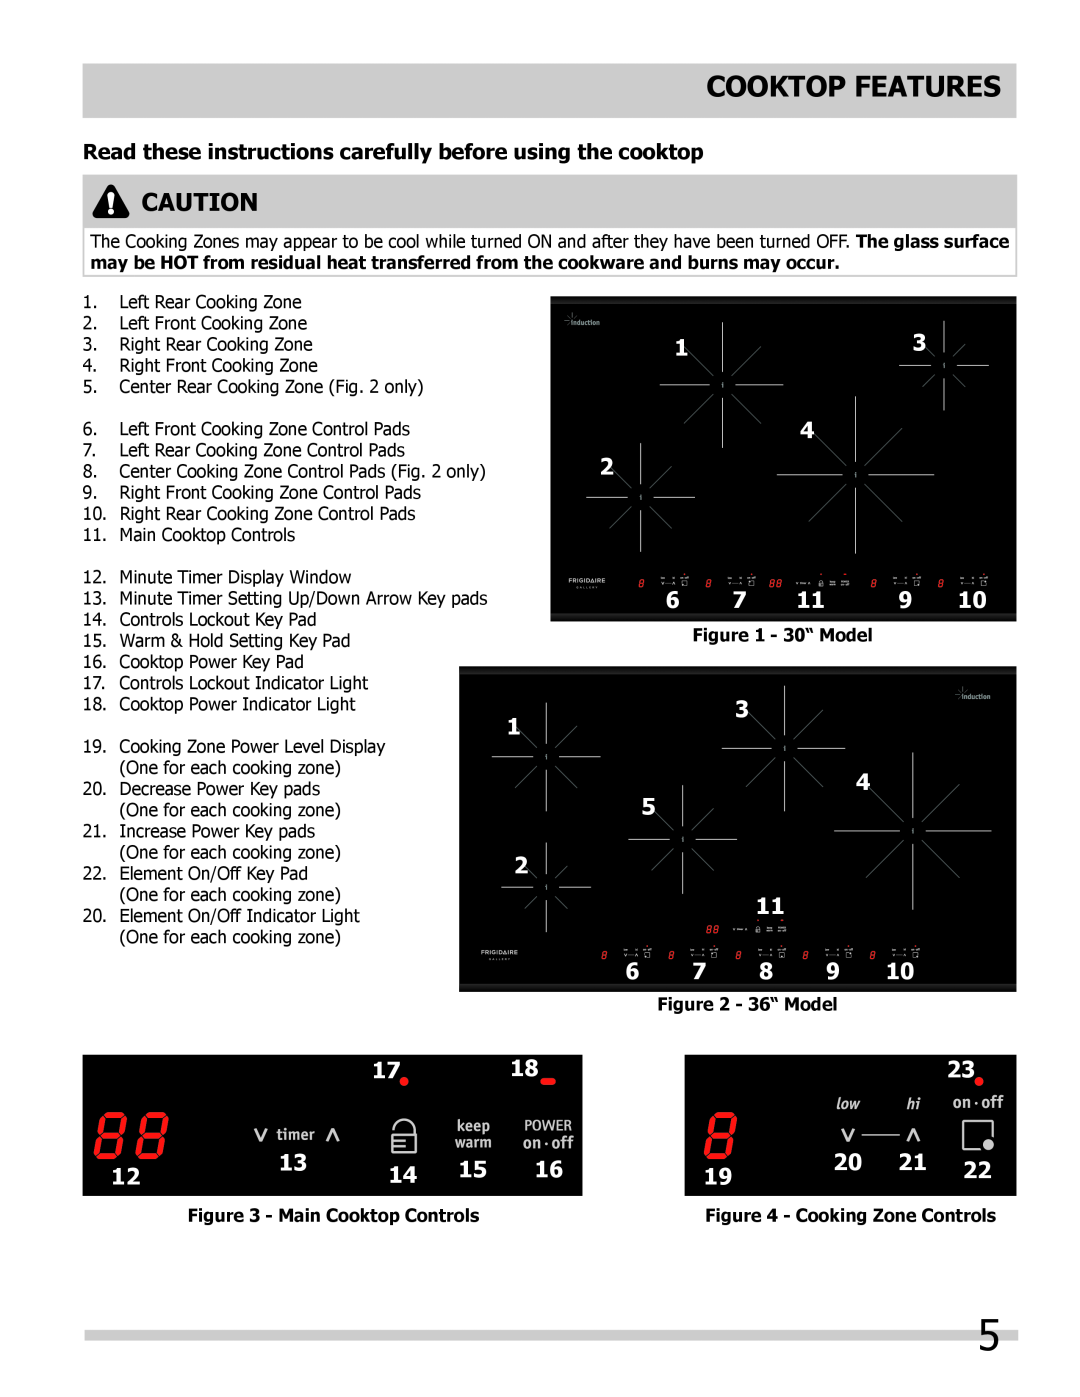 Frigidaire FGIC3067MB Cooktop Features, Read these instructions carefully before using the cooktop, Main Cooktop Controls 